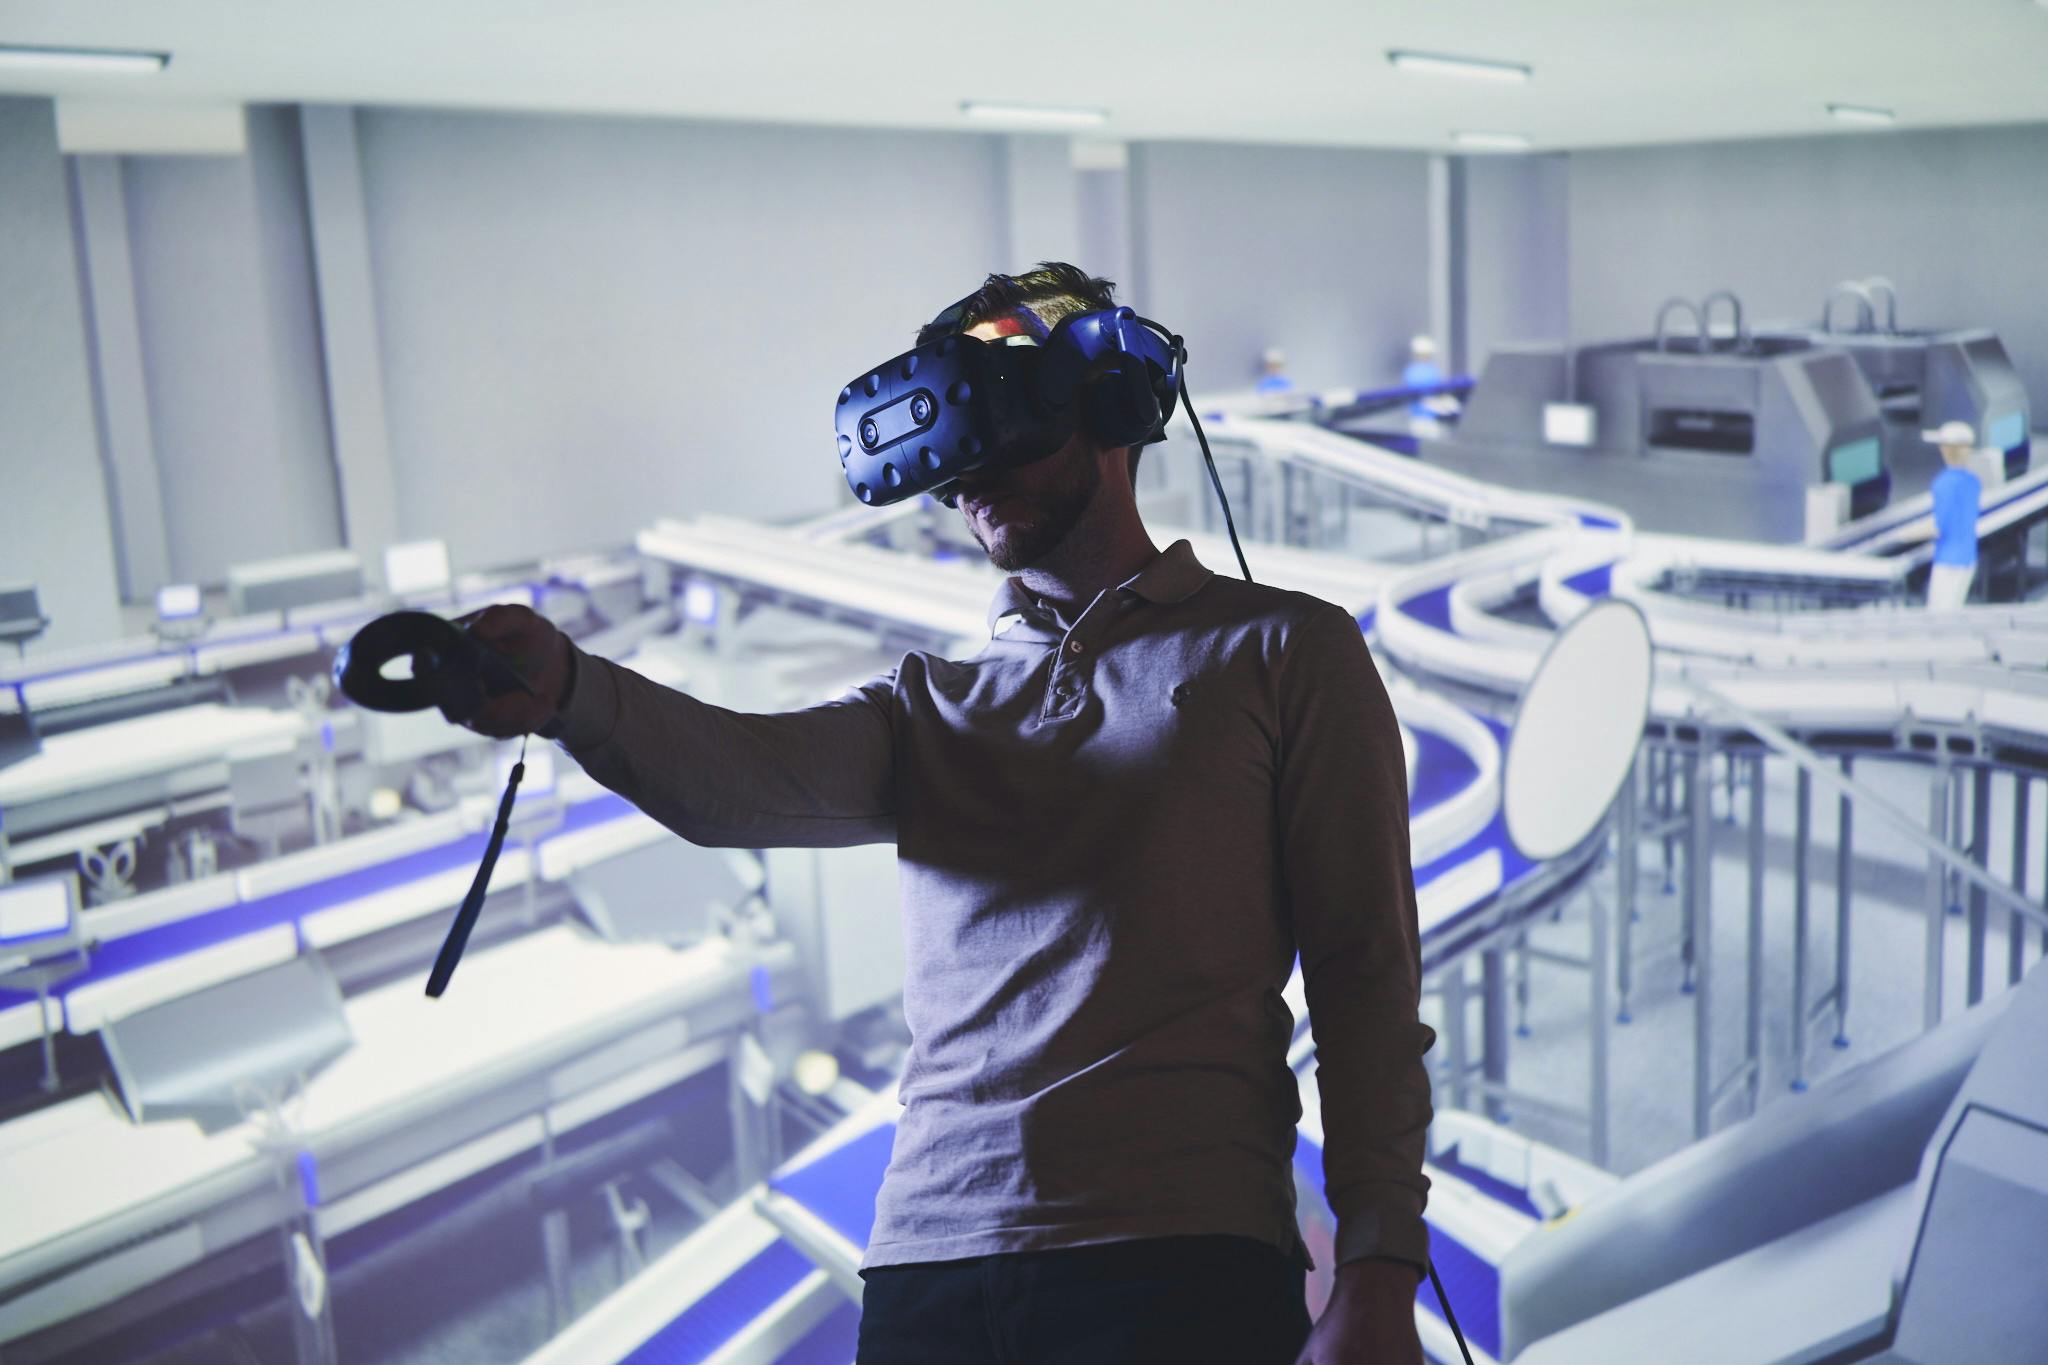 Using virtual reality to design equipment at Marel